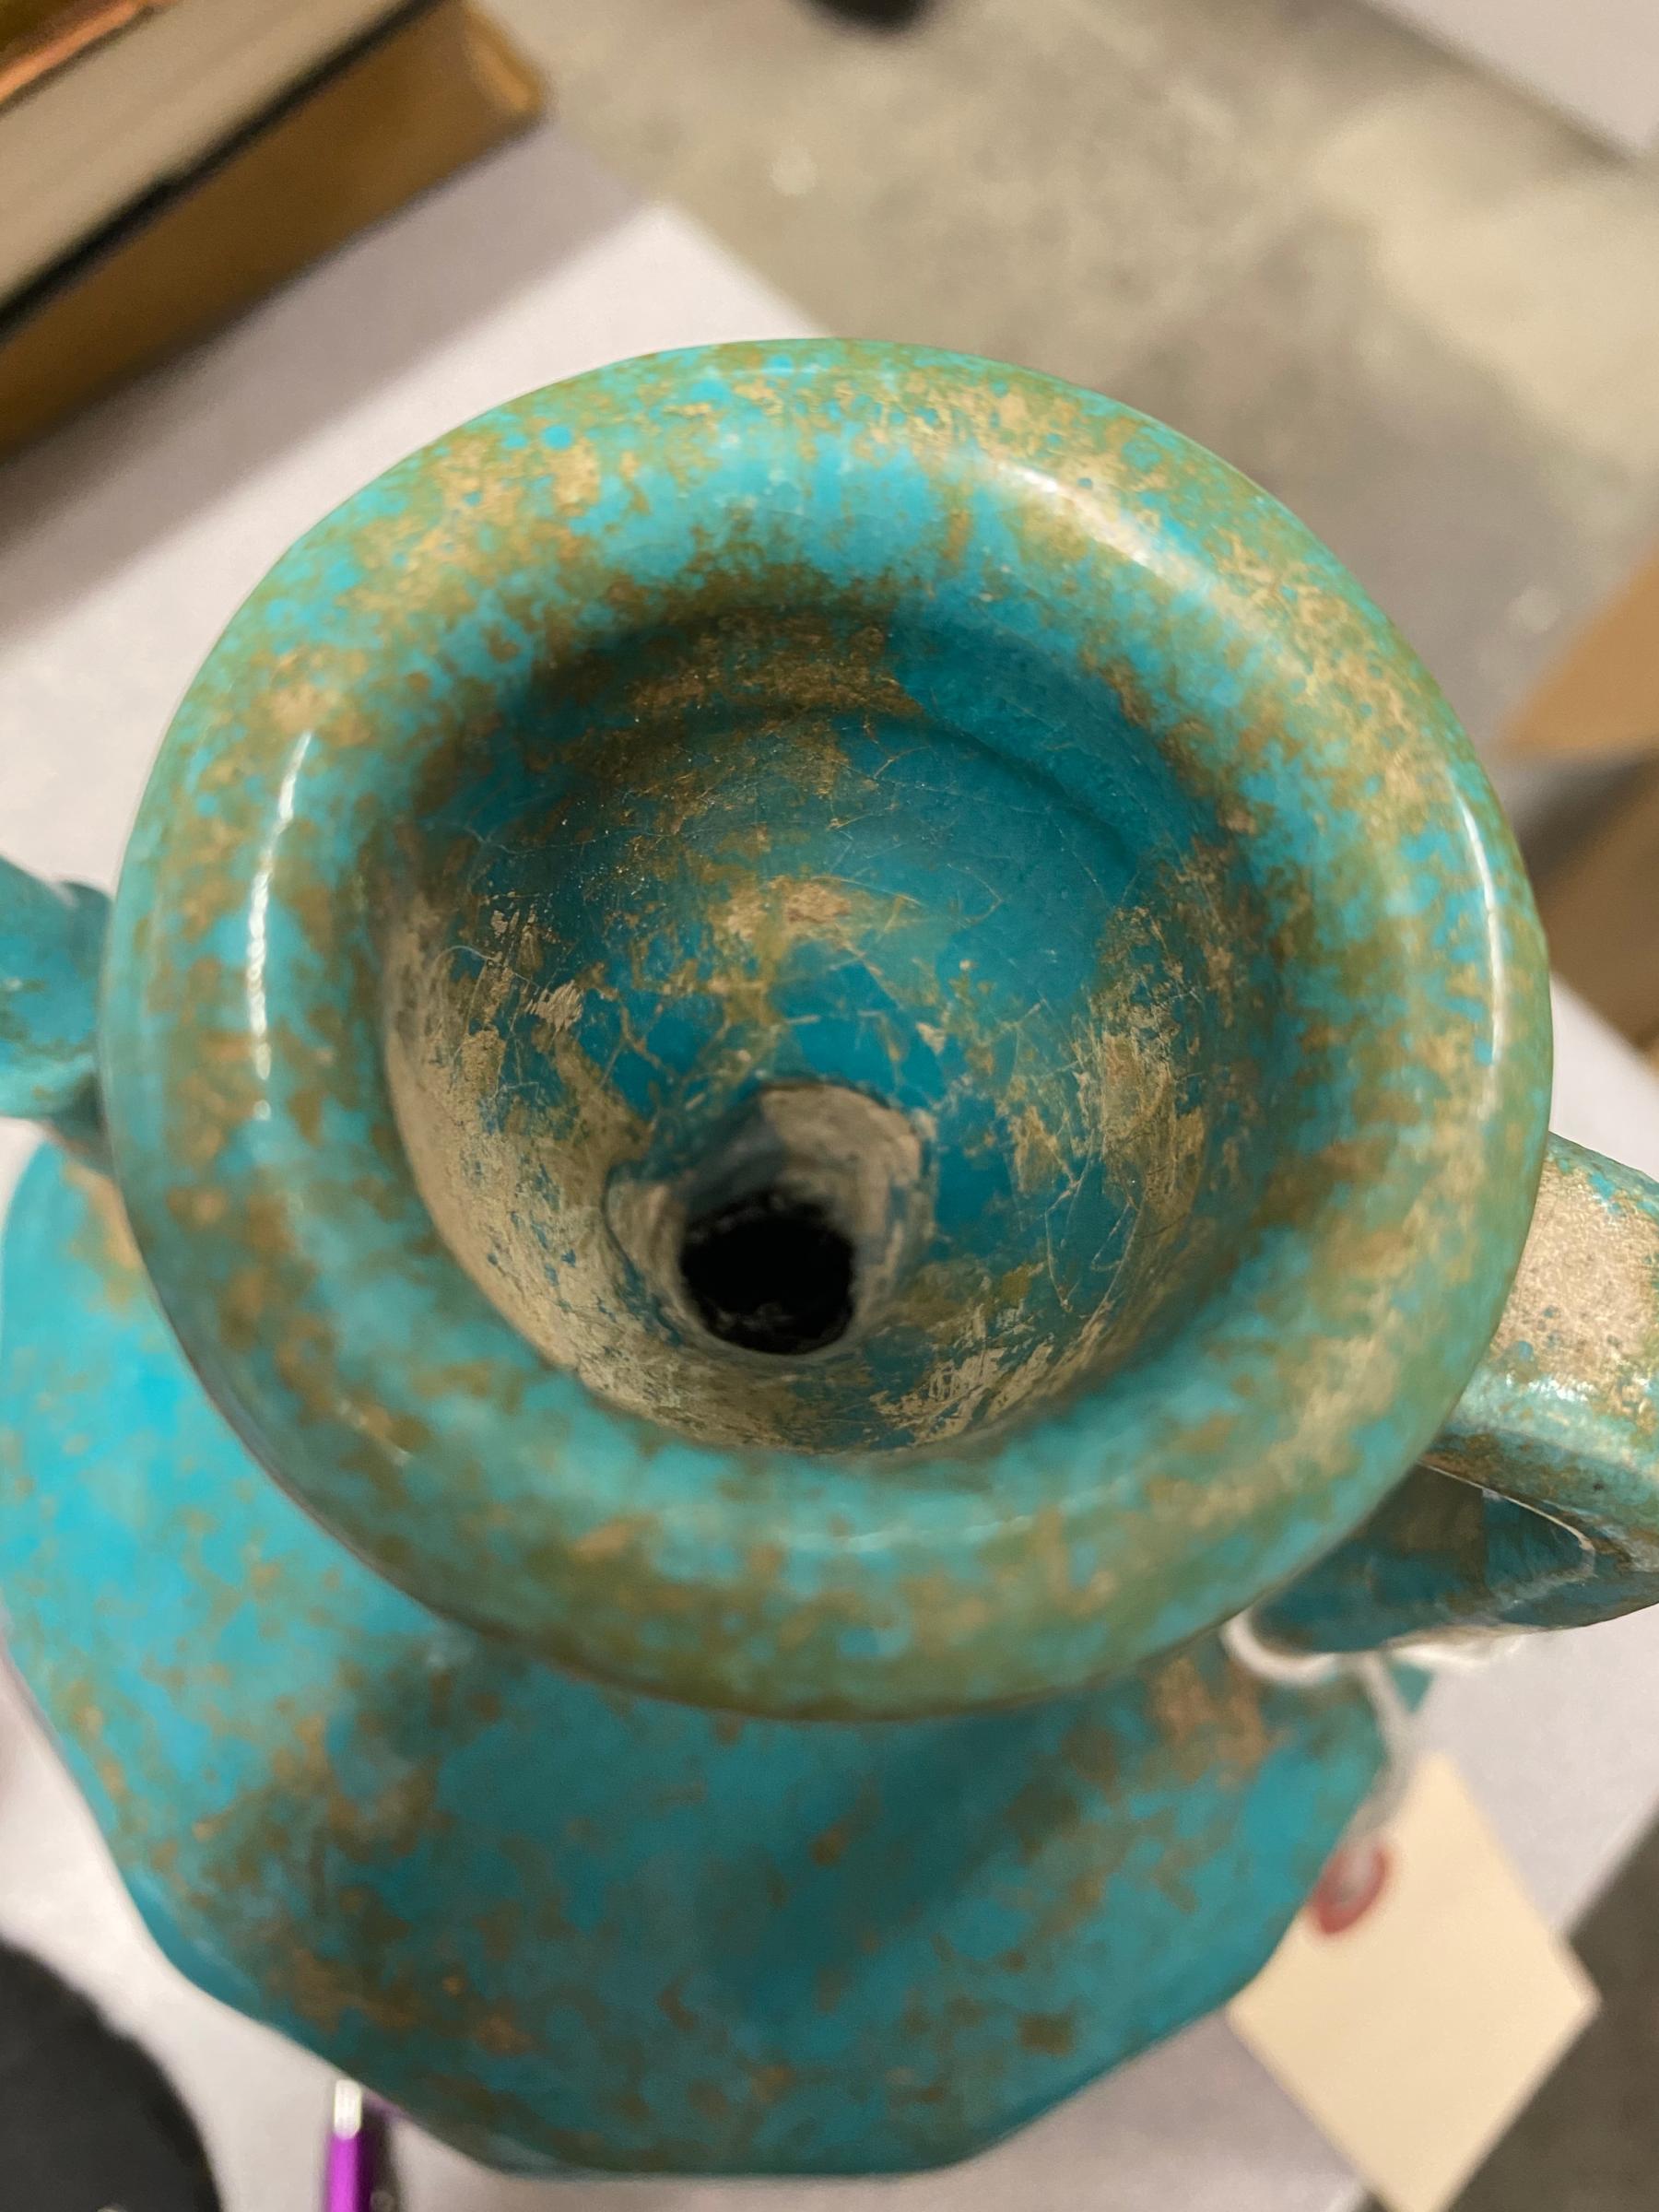 Persian Turquoise Glazed Fritware Pottery Ewer, 12th/13th century